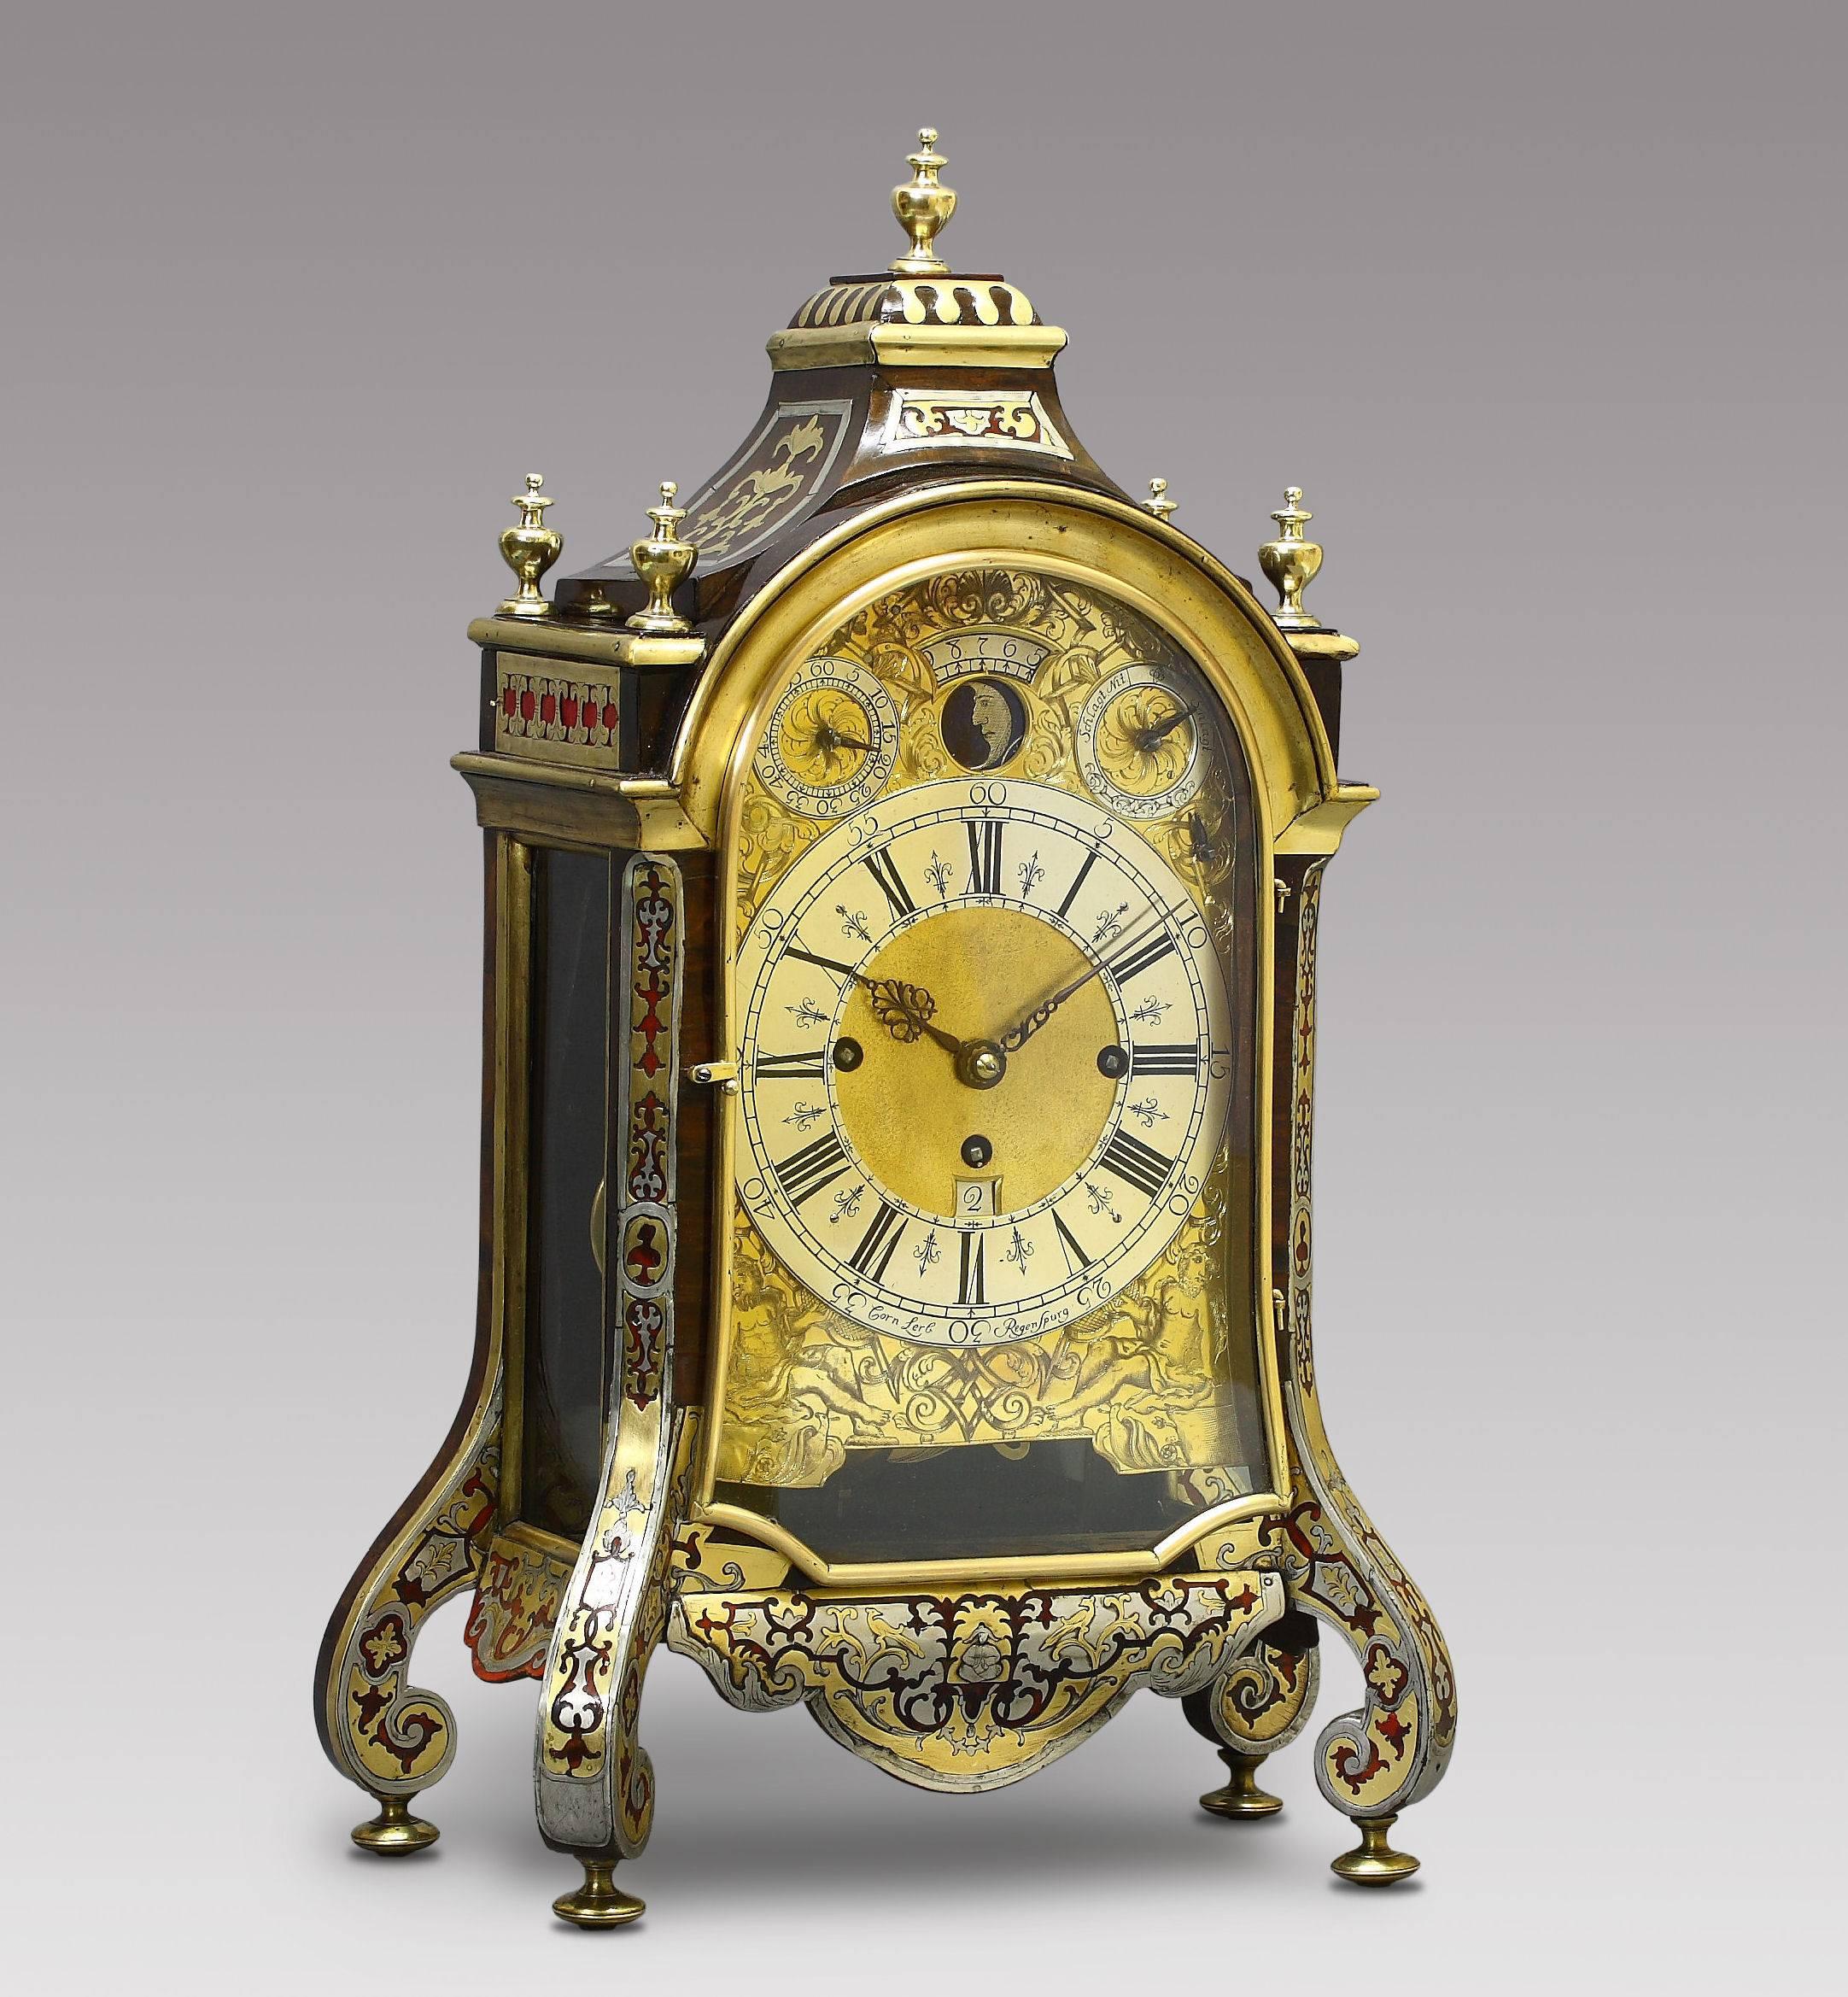 German table clock, signed corn Lerb Regenspurg, circa 1740 (Cornelius Lerb, 1706-after 1750).
Three-train movement, on the left for the hour strike, in the center for the time and on the right for the quarter-chime, chiming the four quarters on